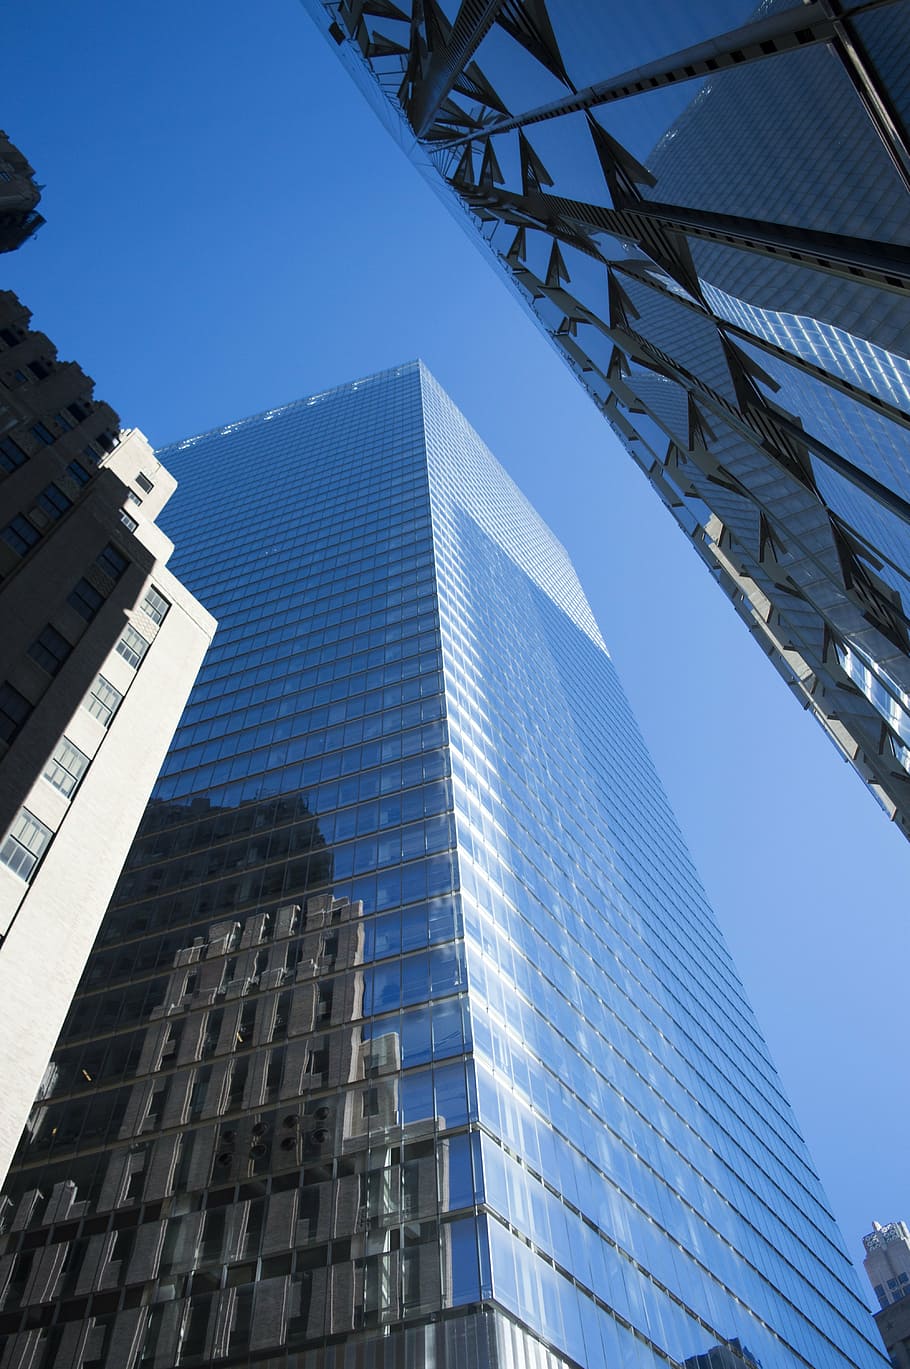 low-angled photography, glass, high, rise building, world trade center, business, global, international, commerce, economy